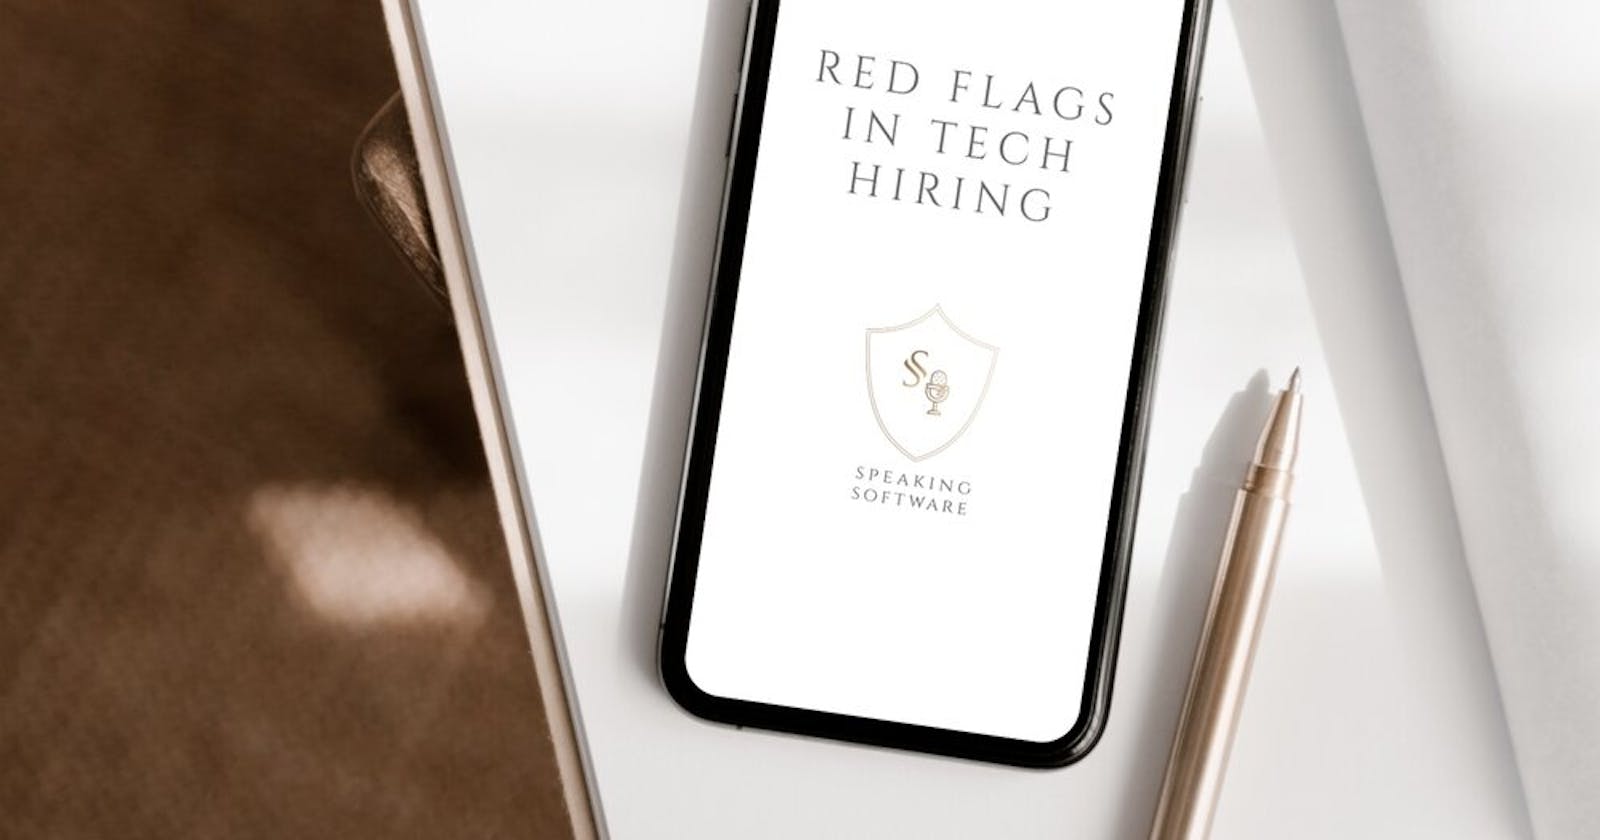 1. Red Flags in Tech Interviewing